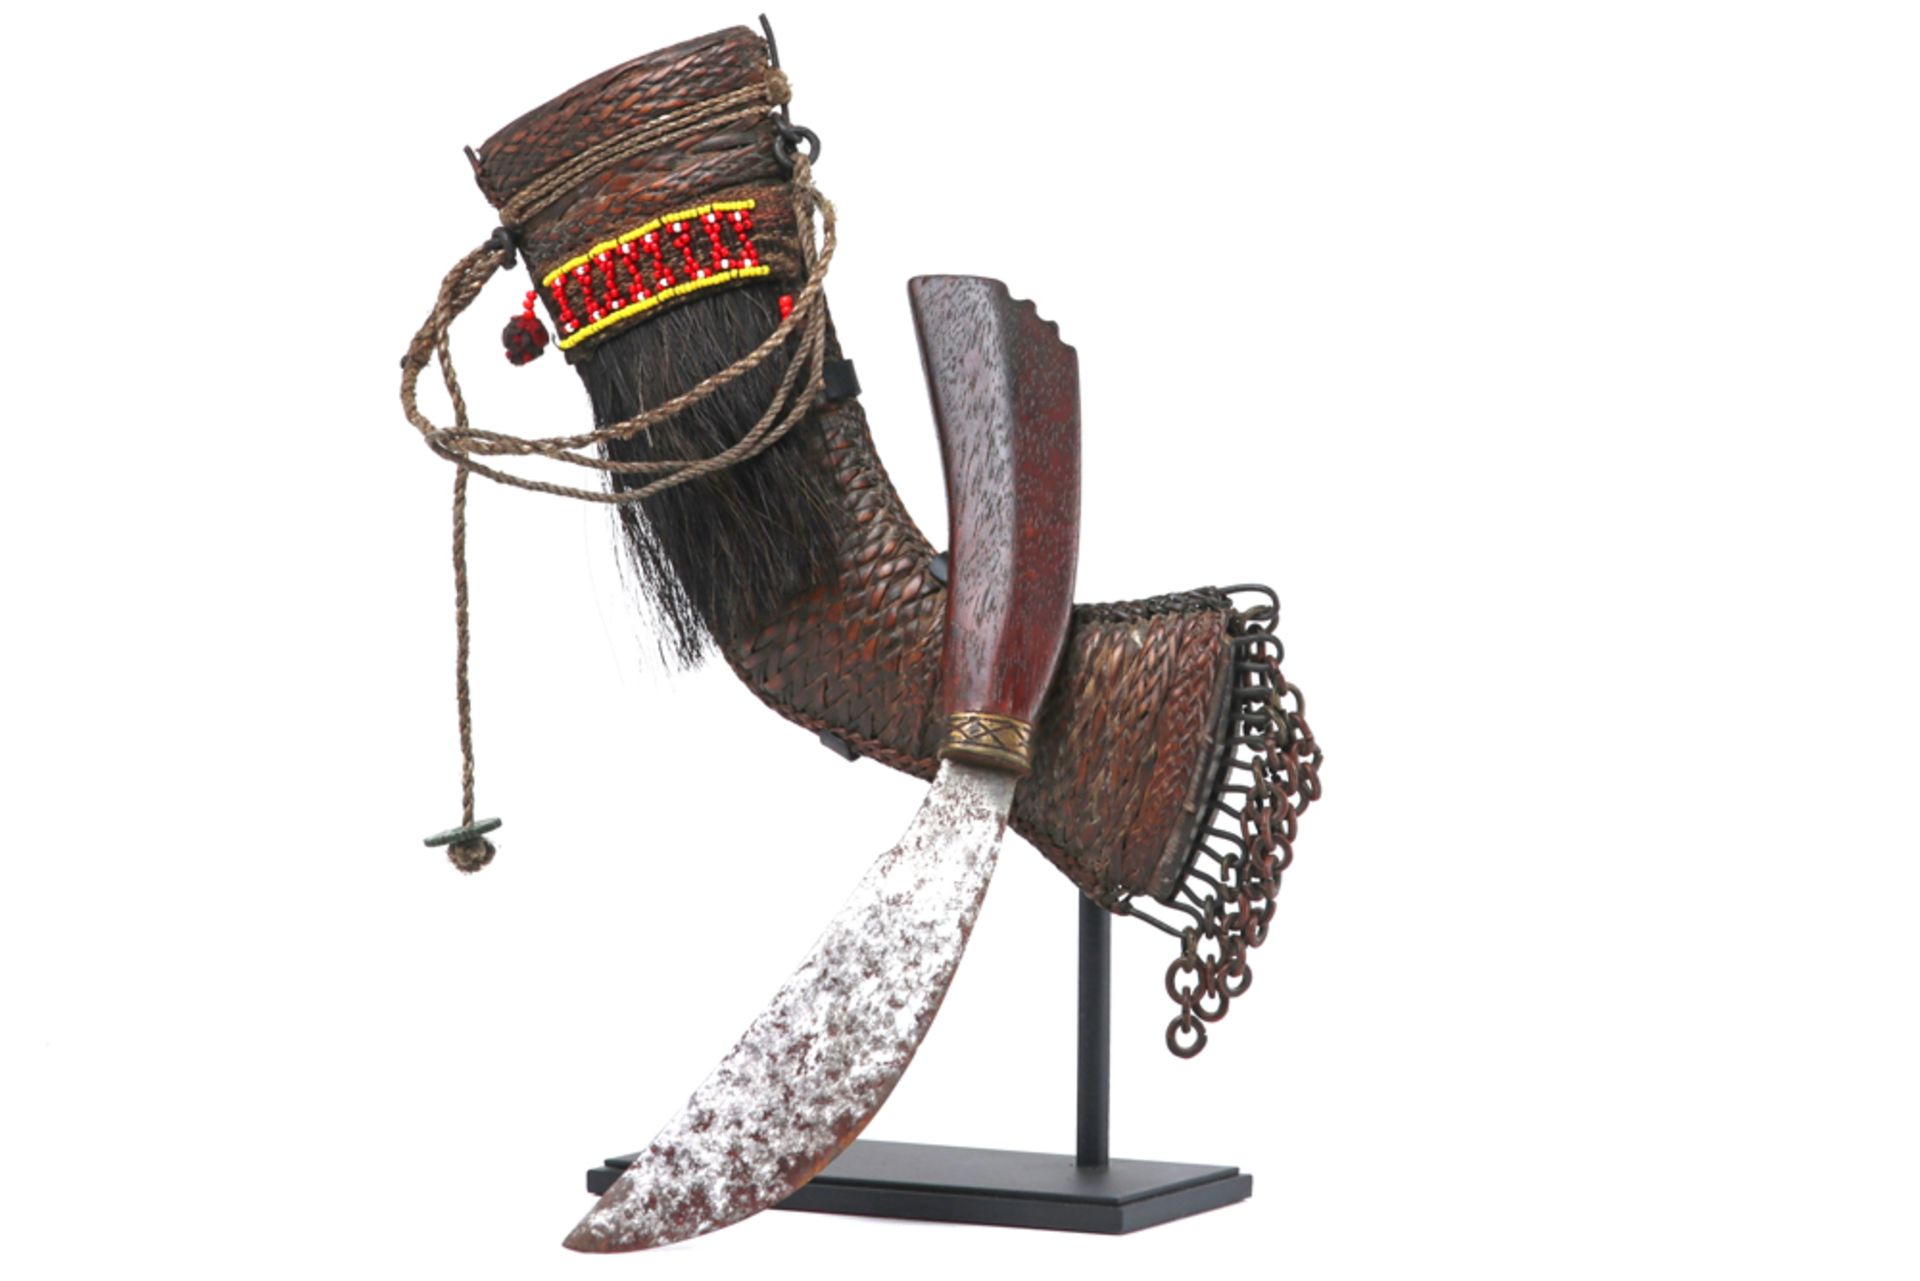 Nepalese Gurka dagger with sheath in fibres and metal adorned with pearls || Nepalese dolk van de - Image 3 of 4